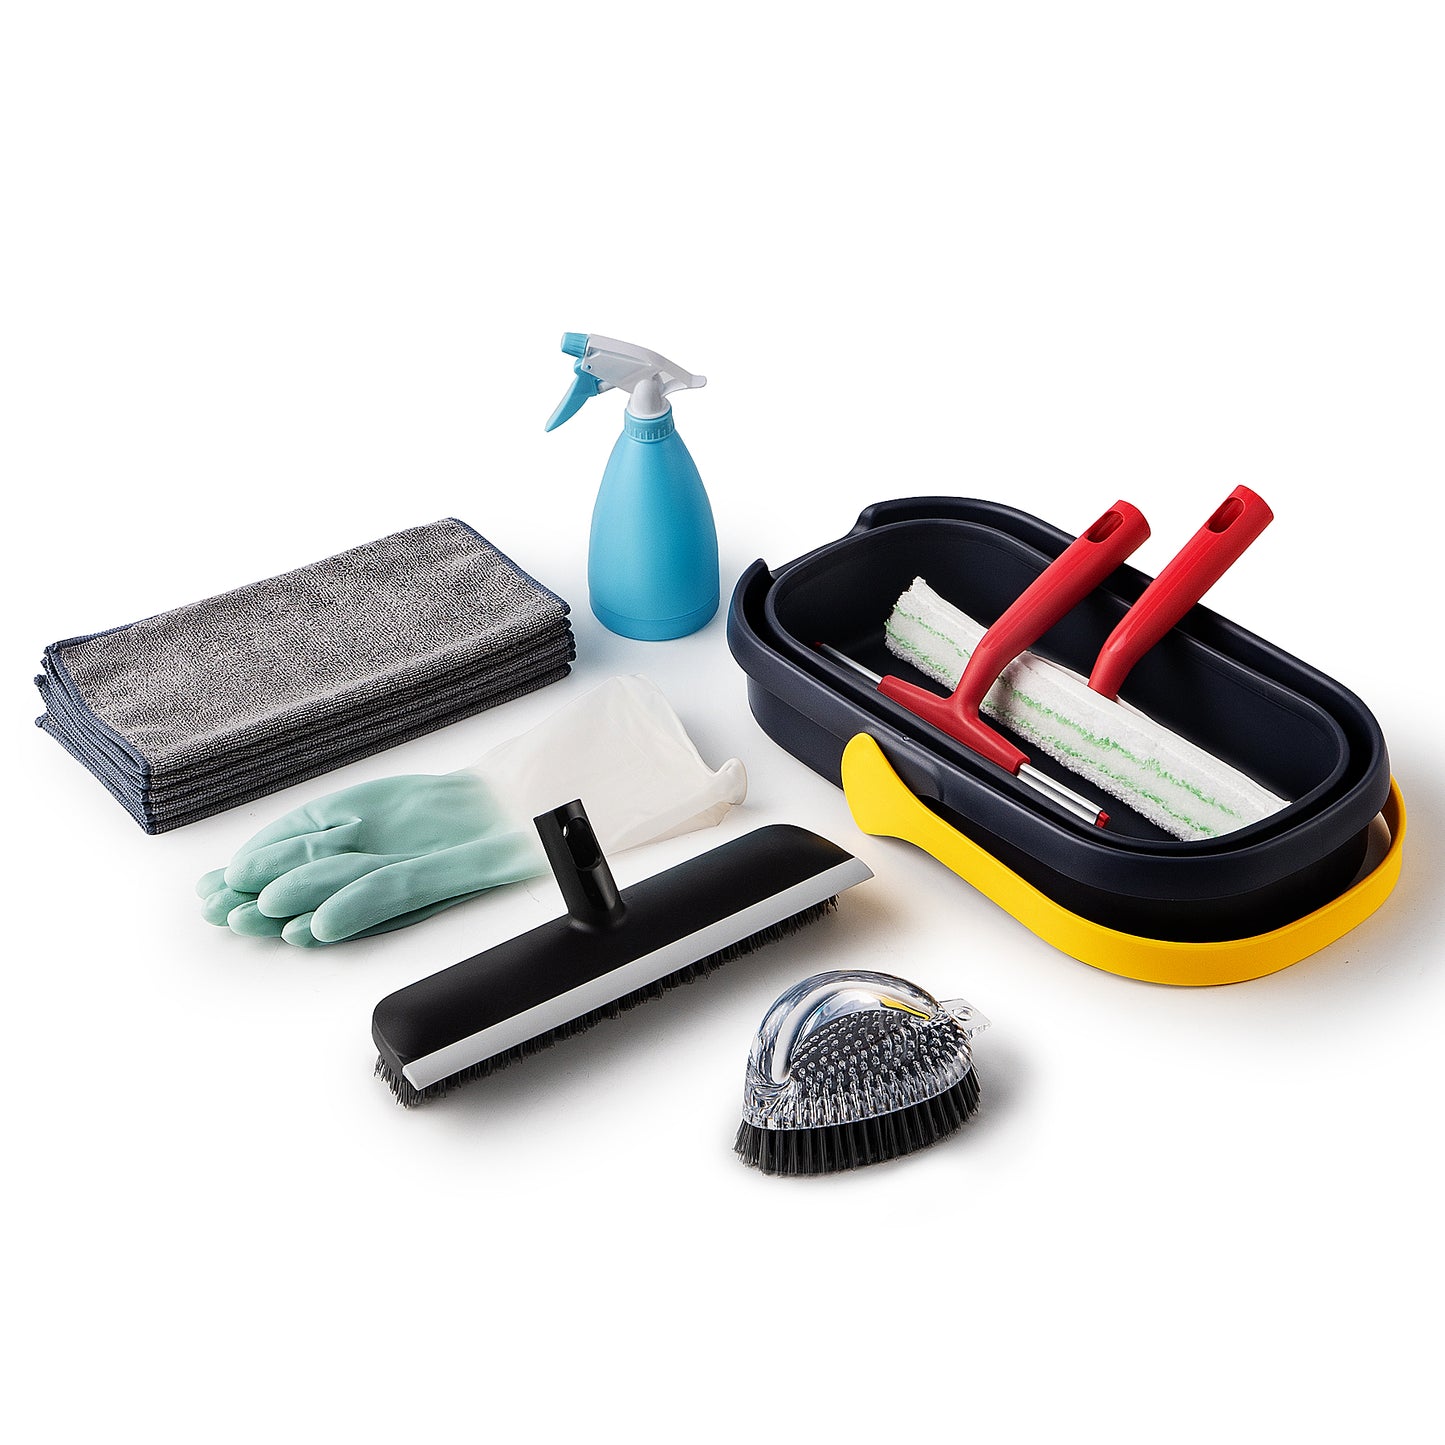 Bathroom Cleaning Set with Collapsible Bucket,Window Squeegee,Bathtub Brush,Floor Scrubber Brush,Cleaning Cloth,Watering Can,Rubber Gloves for Bathroom Floor, Tub, Shower, Tile Surface